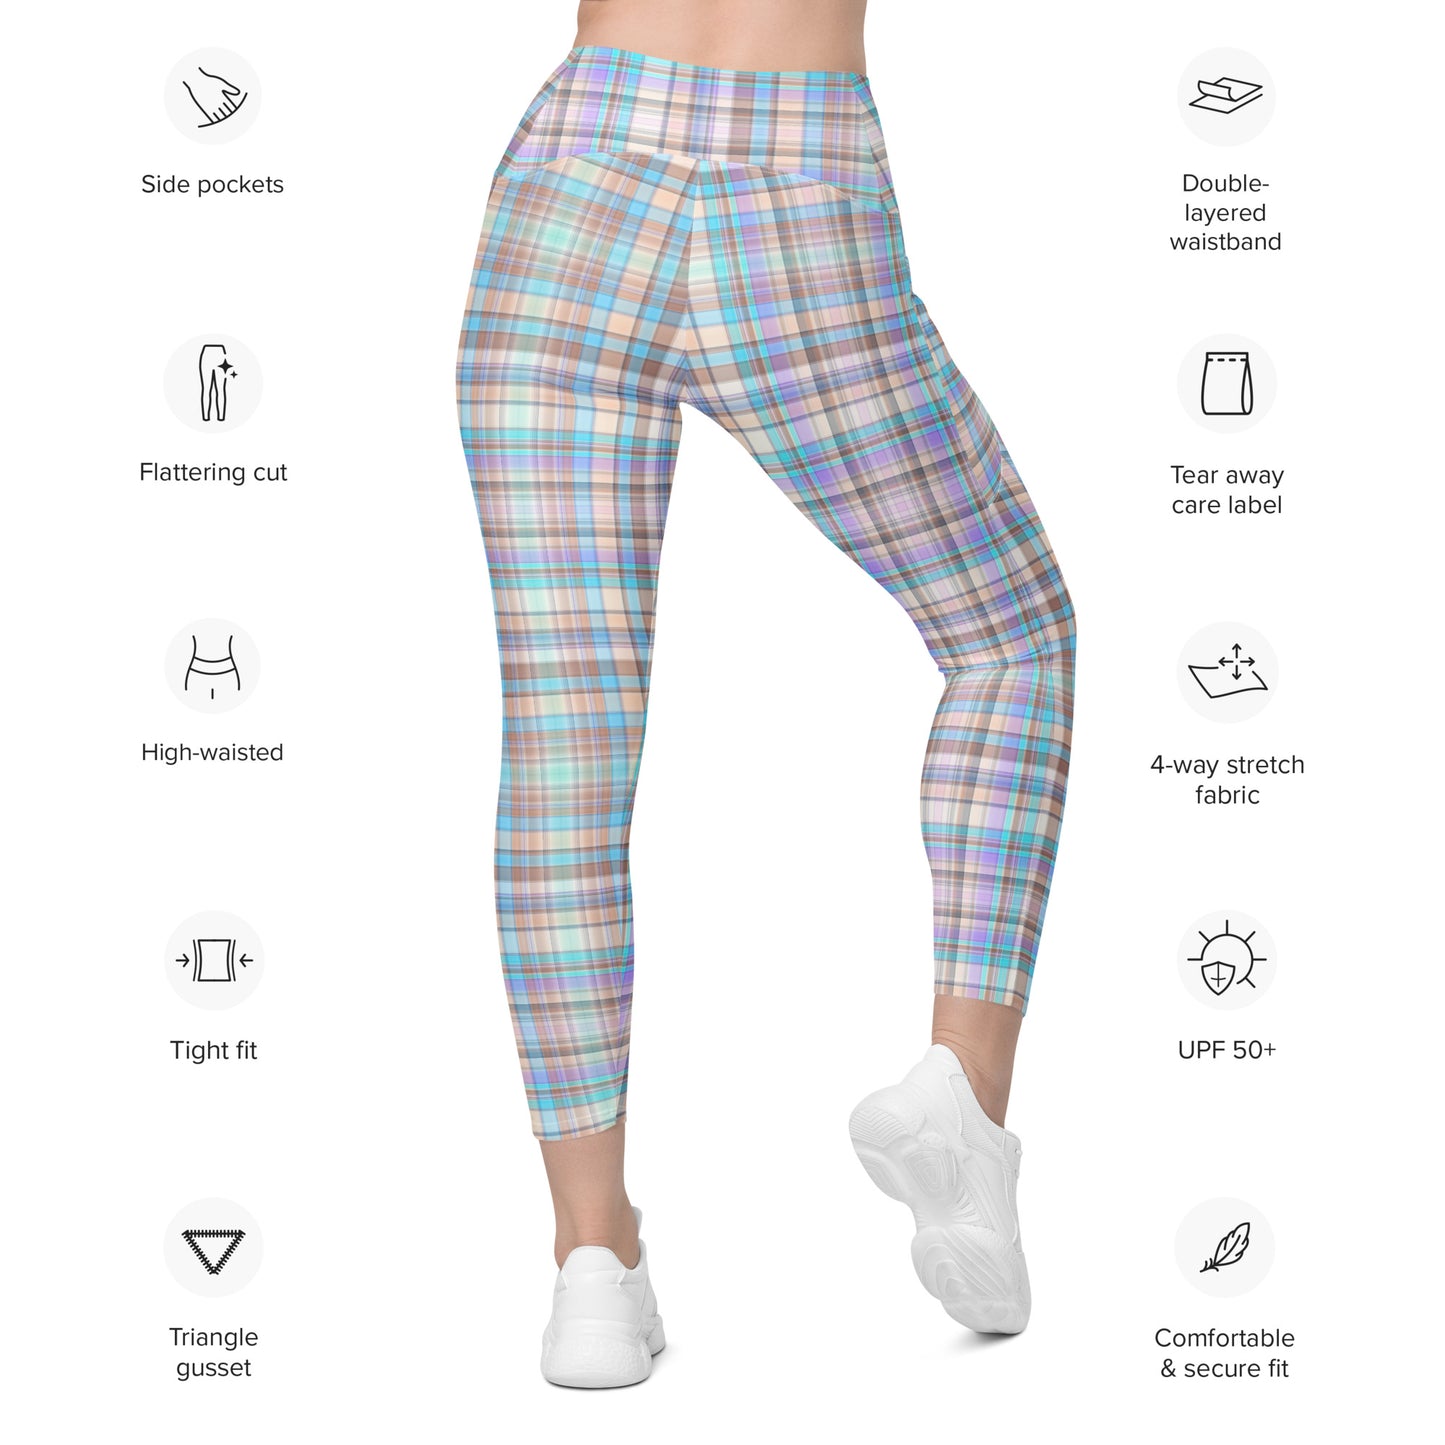 Everyday Plaid Leggings with Pockets